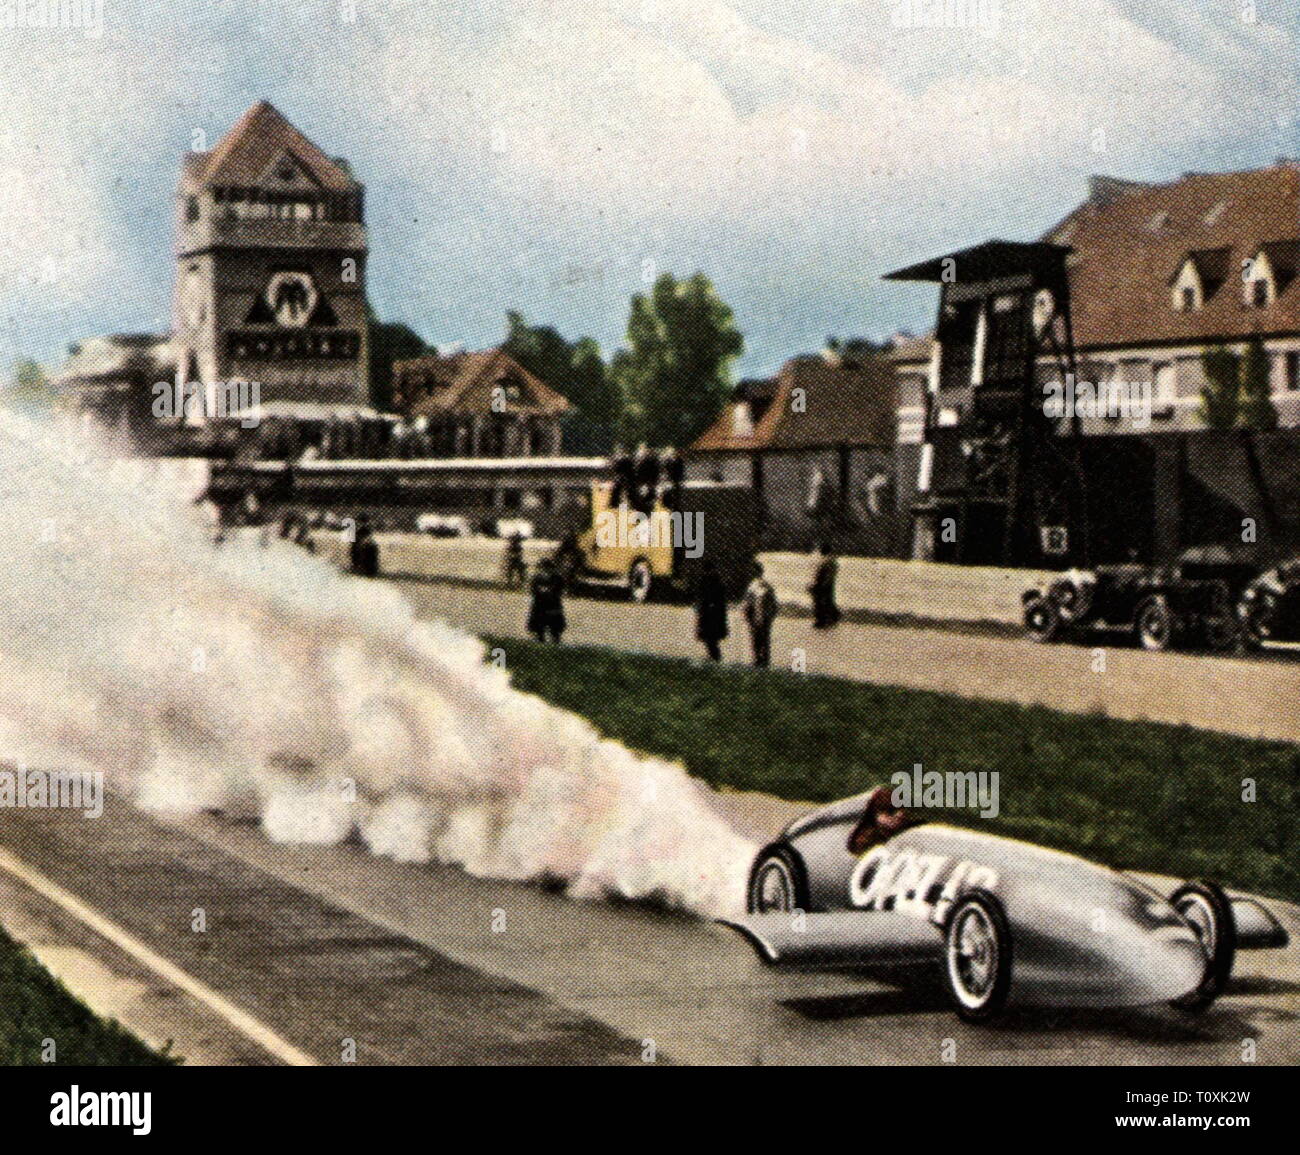 transport / transportation, cars, high-speed vehicles, high-speed world record by Fritz von Opel with the rocket car Opel RAK2, Avus, Berlin, 23.5.1928, coloured photograph, cigarette card, series 'Die Nachkriegszeit', 1935, speed record, world record, world records, speed, motorway, expressway, motorways, highway, rocket propulsion, technics, technology, technologies, Germany, German Reich, Weimar Republic, people, 1920s, 20th century, transport, transportation, cars, car, coloured, colored, post war period, post-war period, post-war years, post, Additional-Rights-Clearance-Info-Not-Available Stock Photo